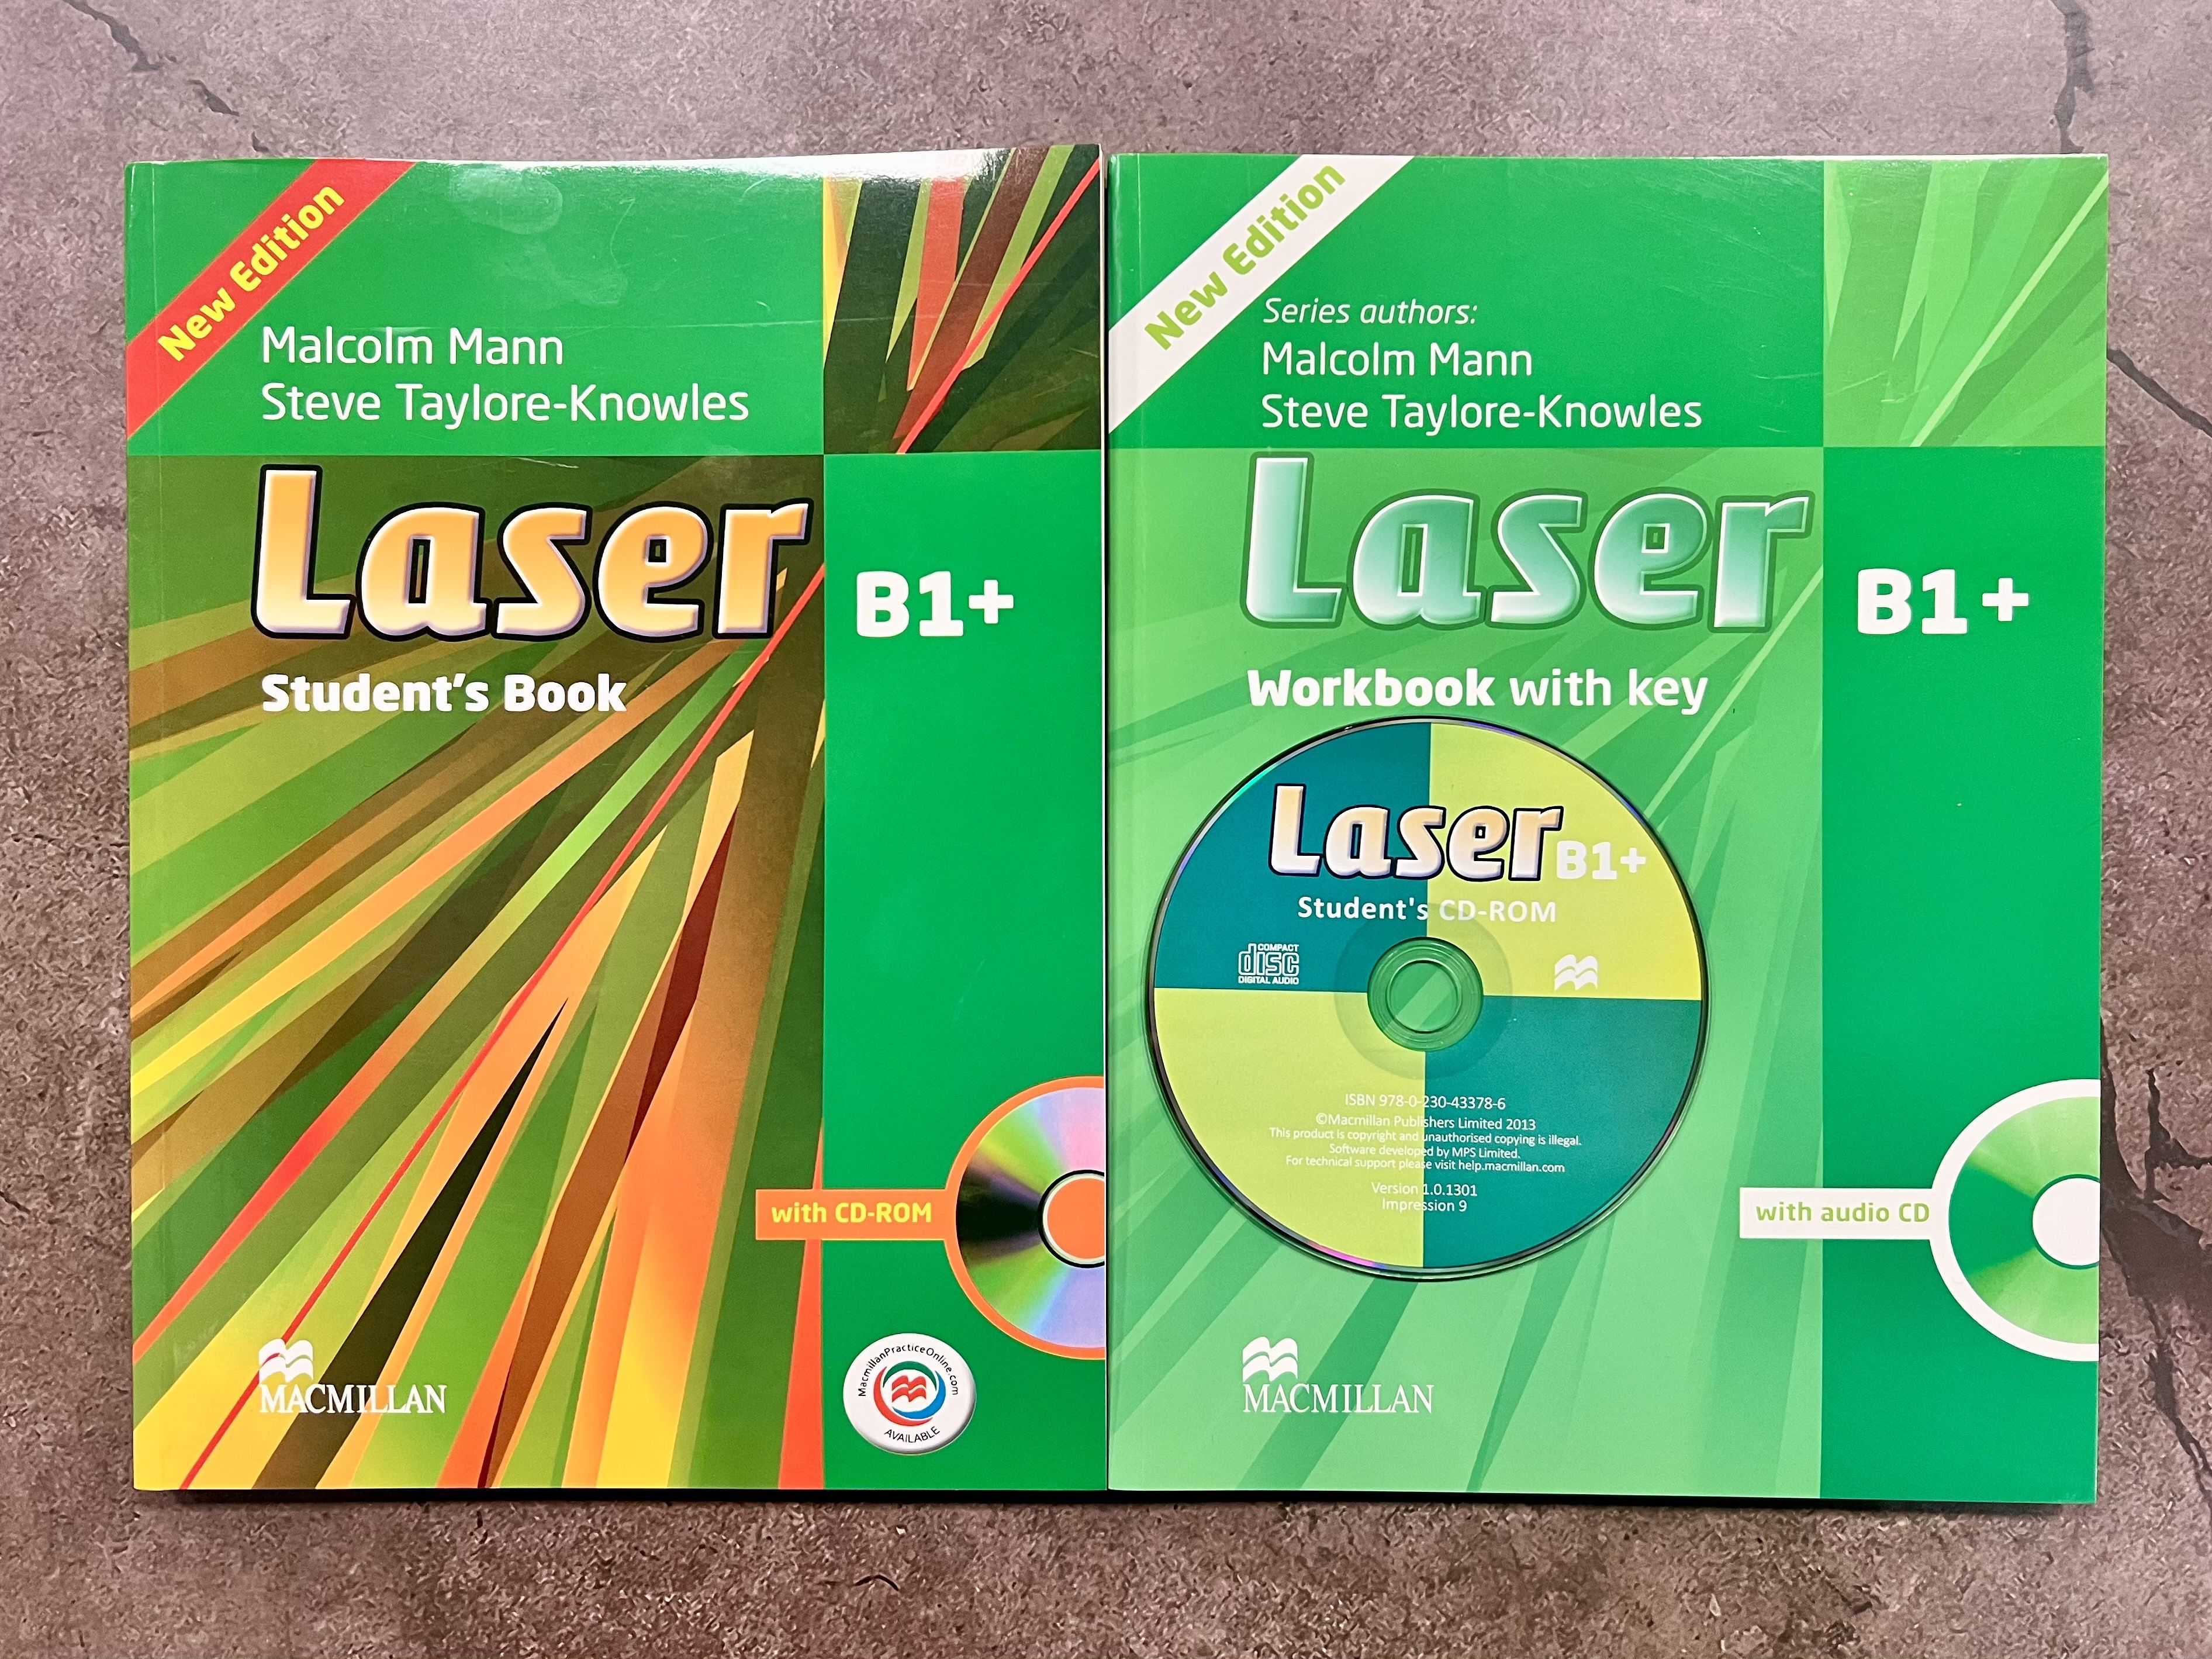 Laser (3rd edition) B1 Student's Book and CD-ROM with MPO